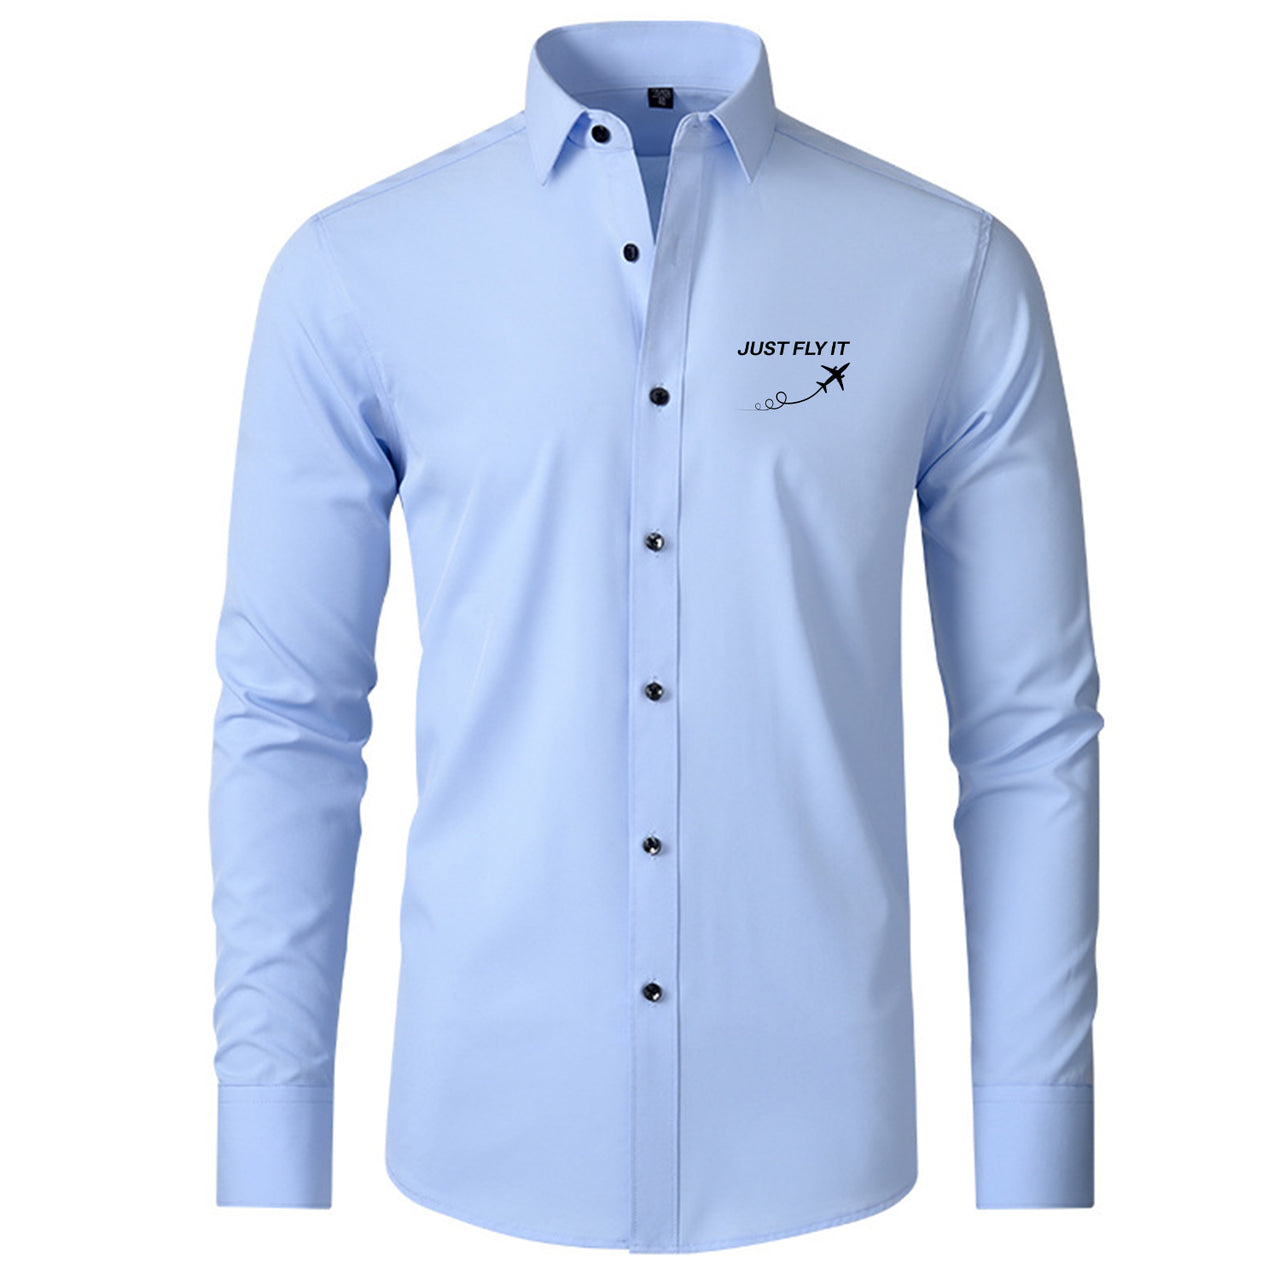 Just Fly It Designed Long Sleeve Shirts